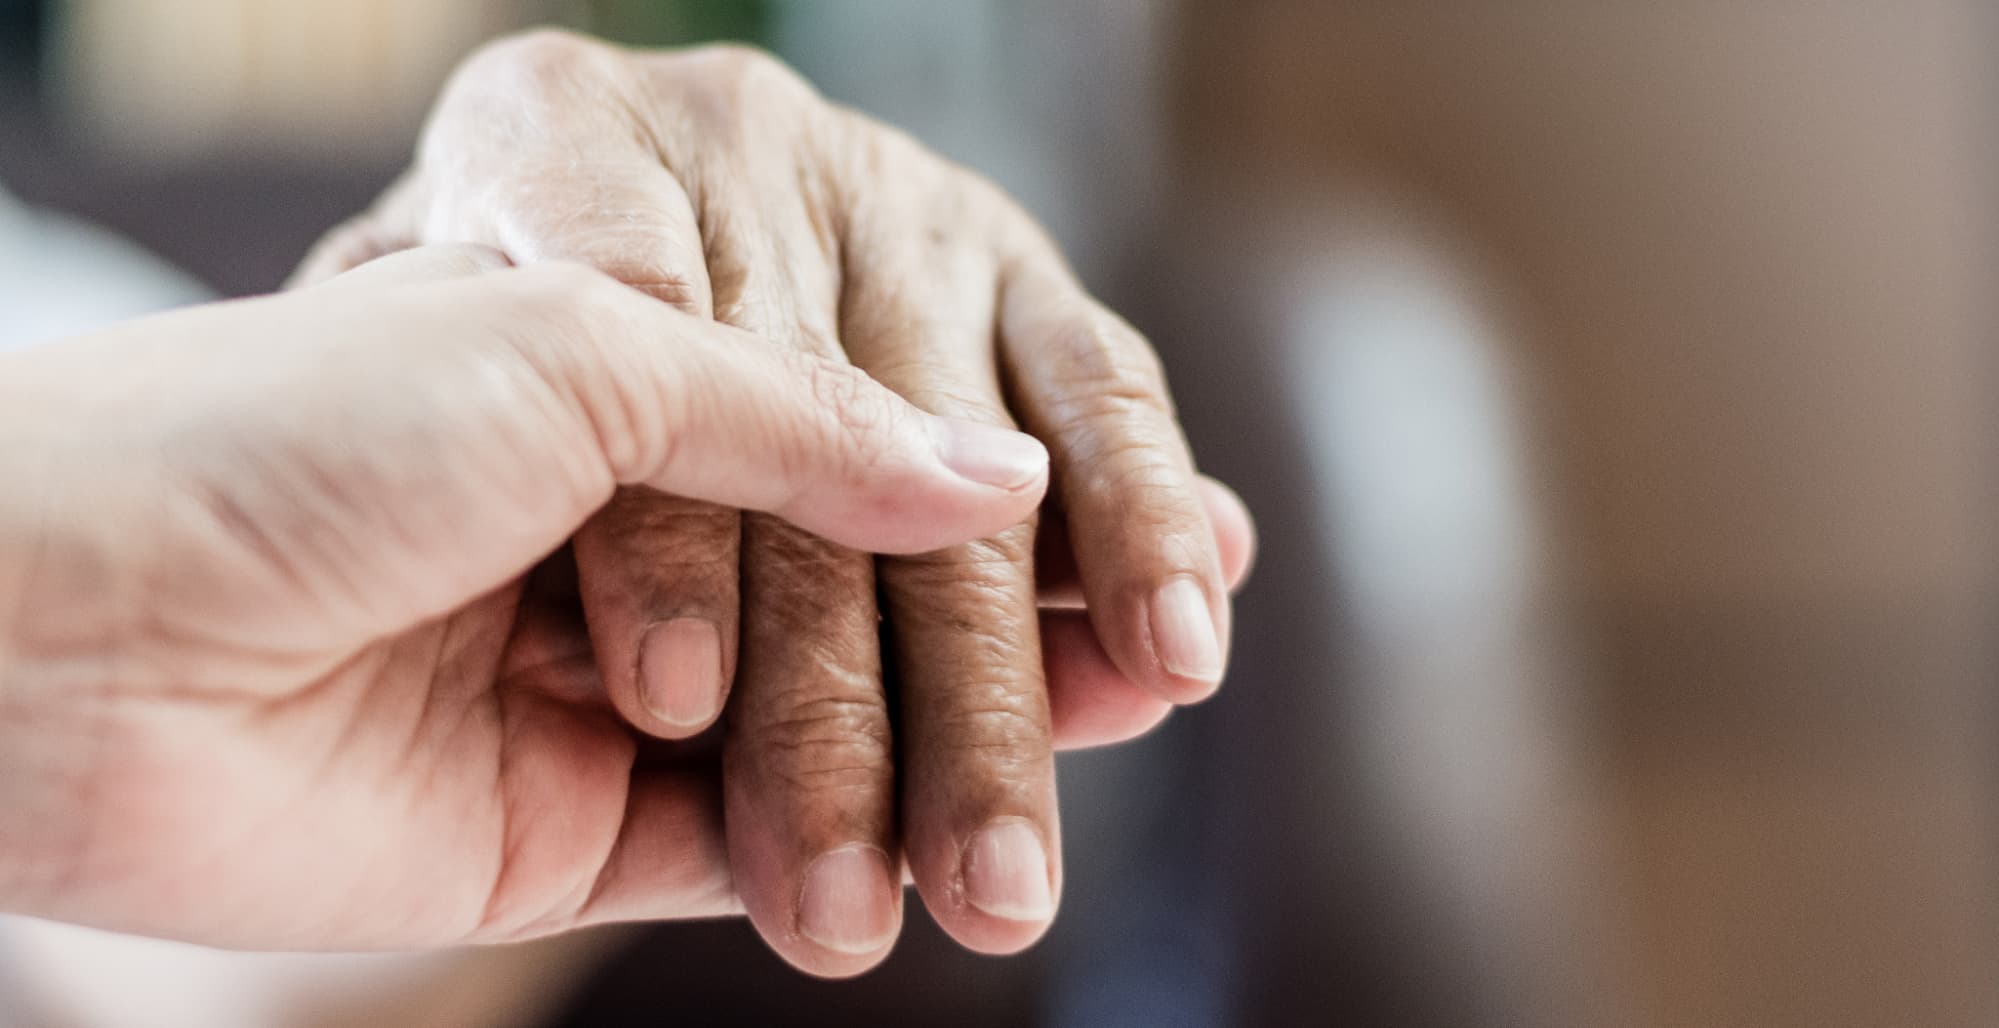 A nurses' hand holding the hand of an older patient